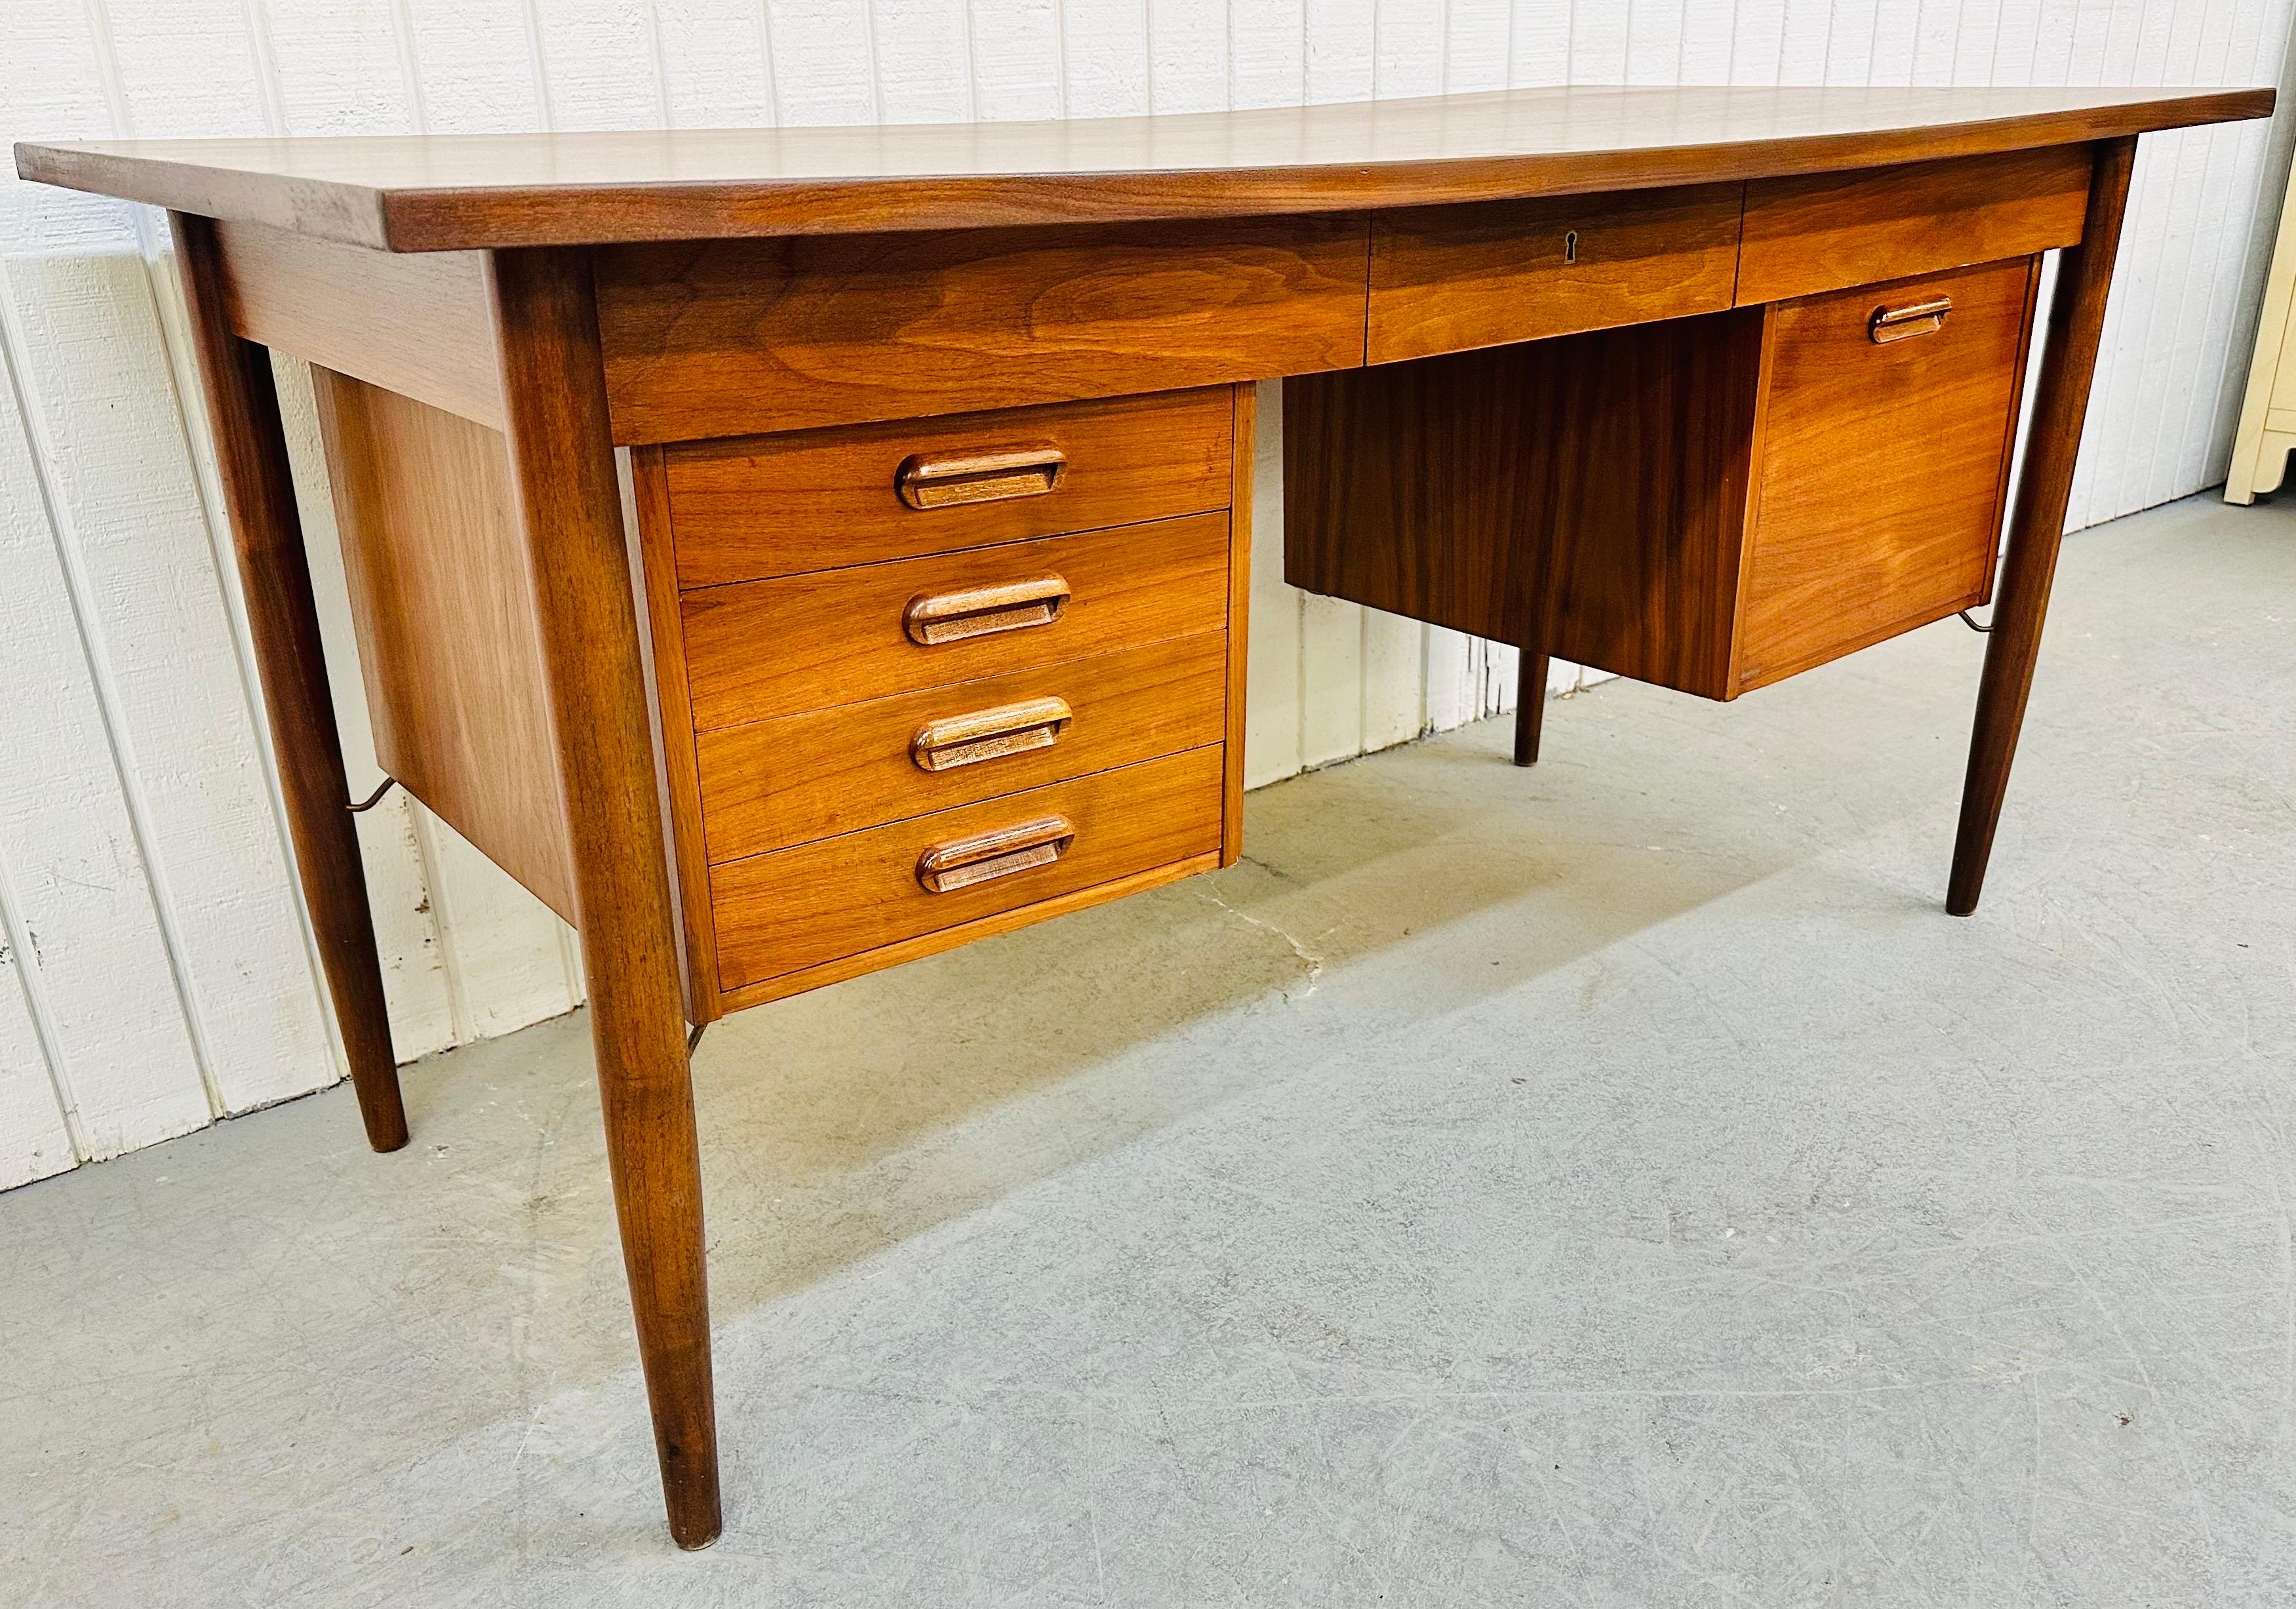 This listing is for a midcentury Danish Modern Teak Executive Desk. Featuring a large rectangular teak top, four legs with floating drawers that give this piece a free formed design, one large drawer for storage, four small drawers for storage, a